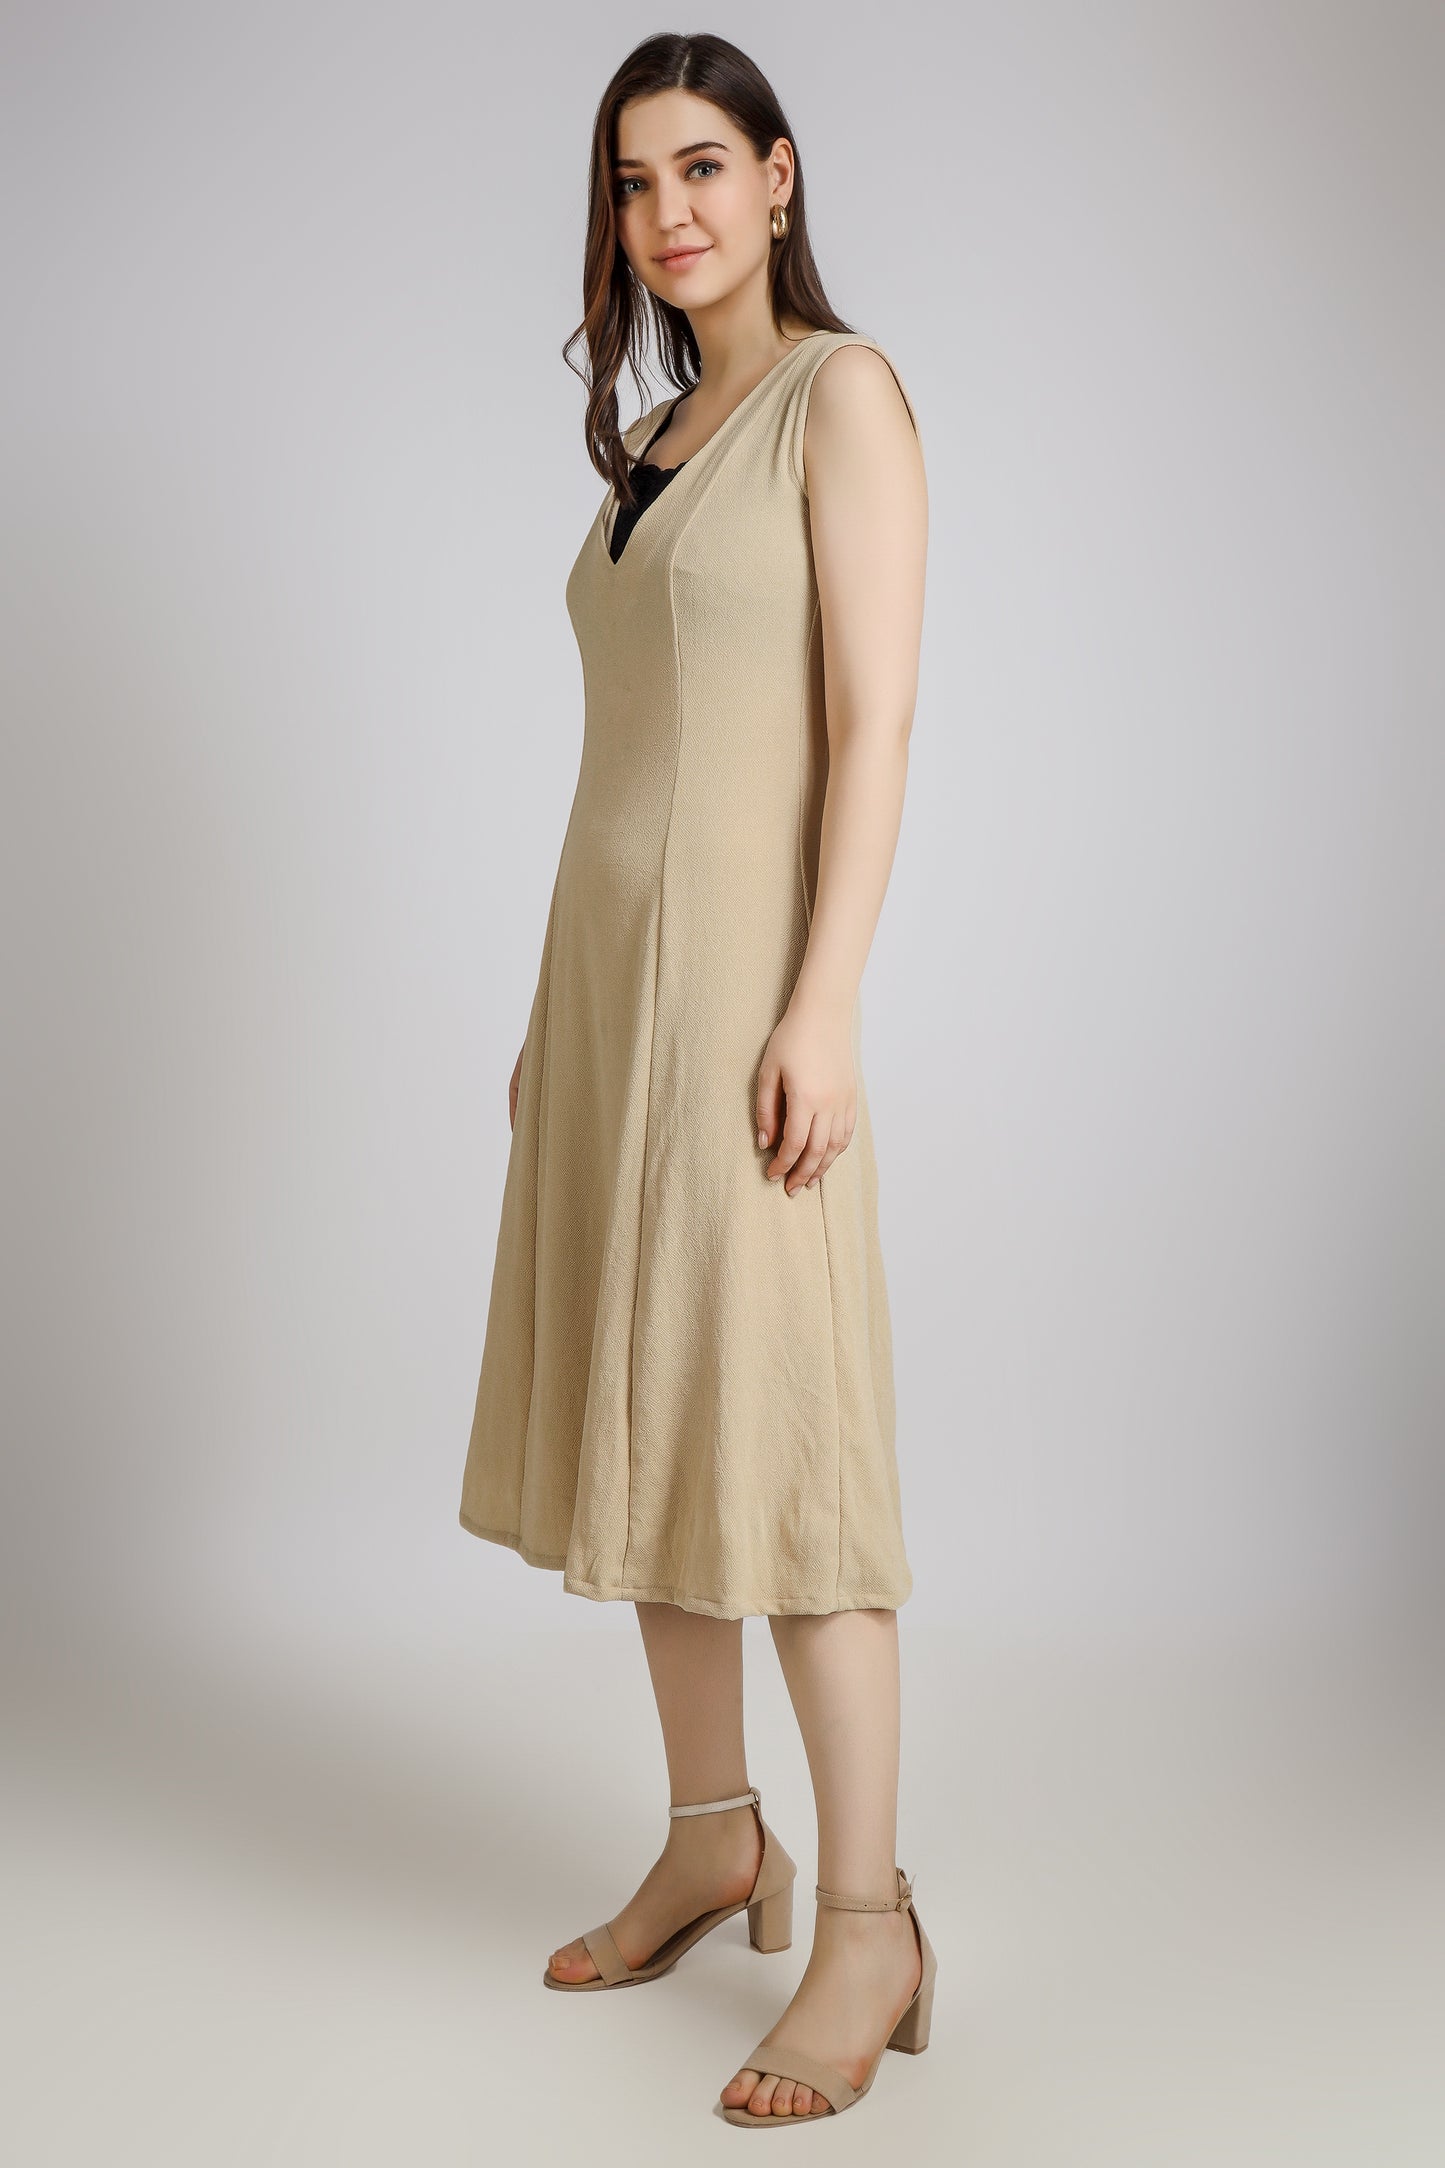 Vomendi Beige Bodycon Dress with Princess Seam and Cut Sleeves